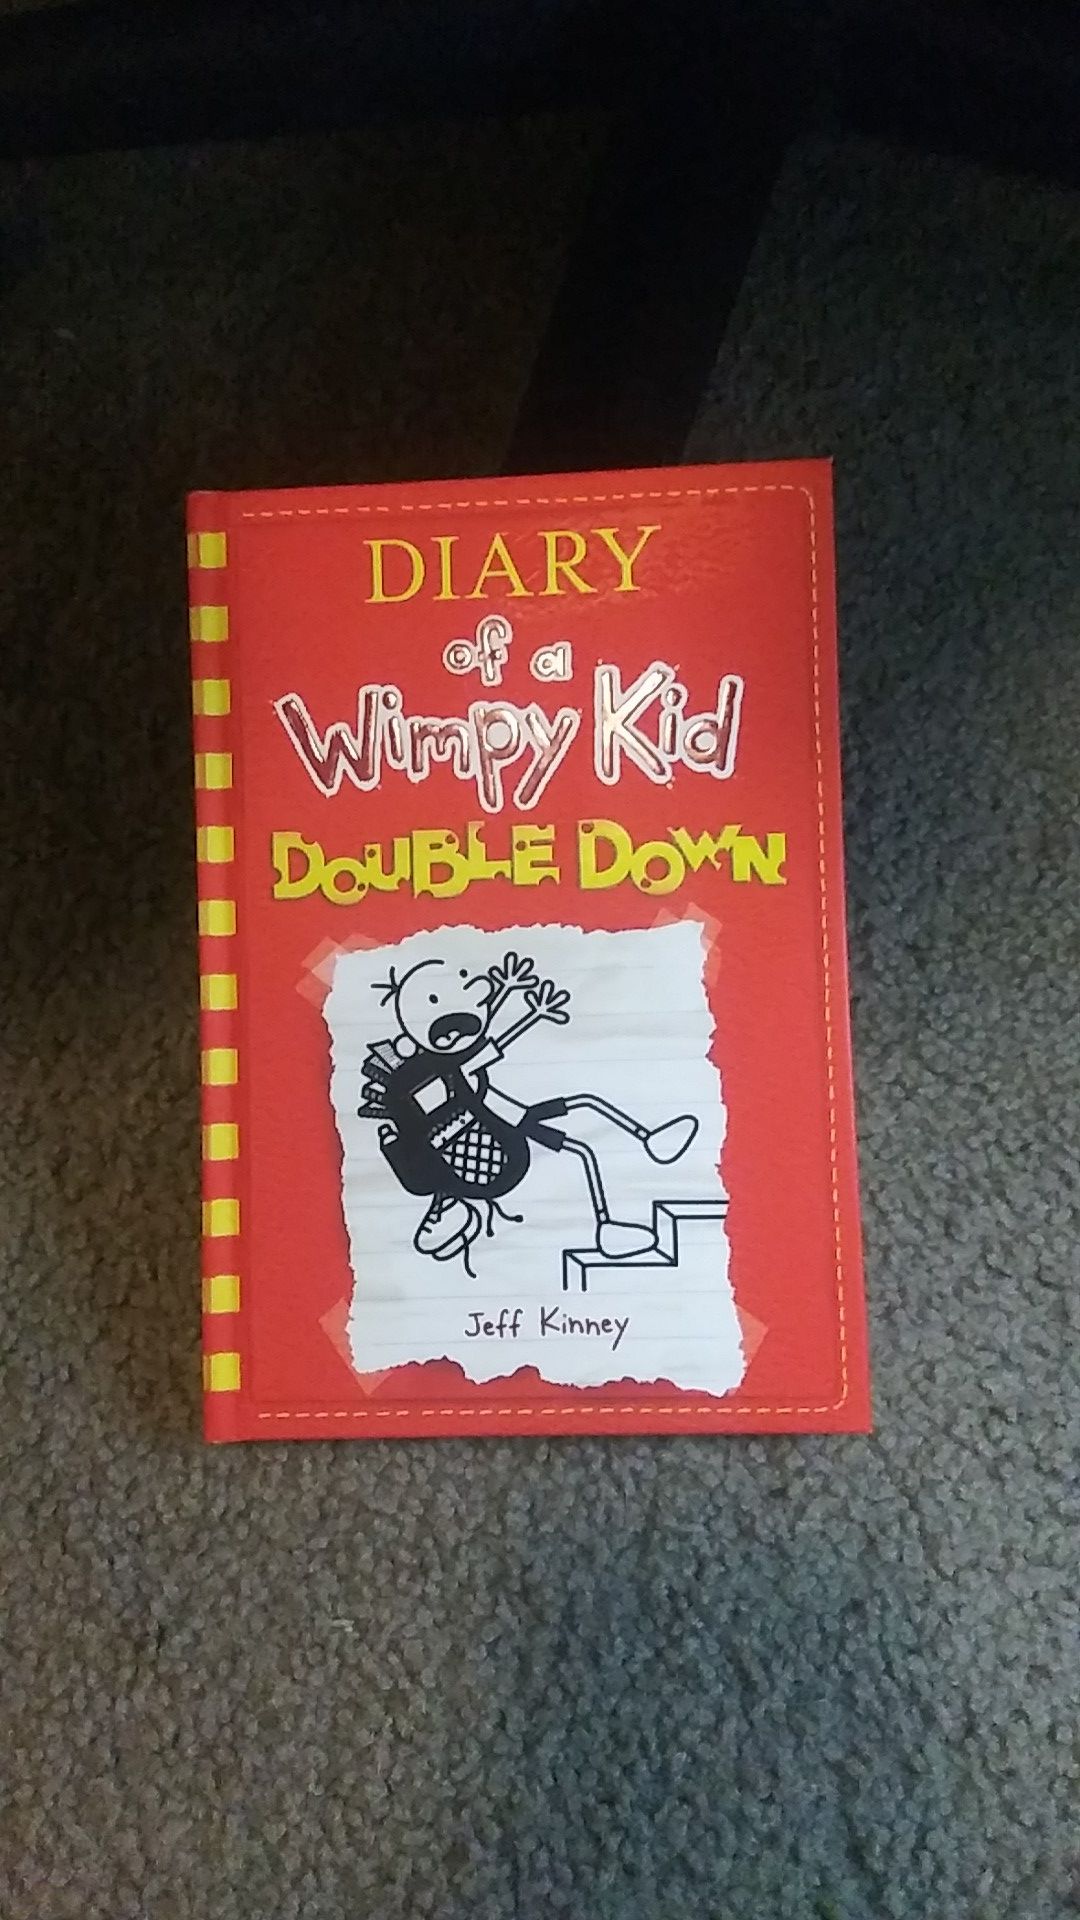 Free Diary of a Wimpy Kid "The Meltdown" and "Double Down"